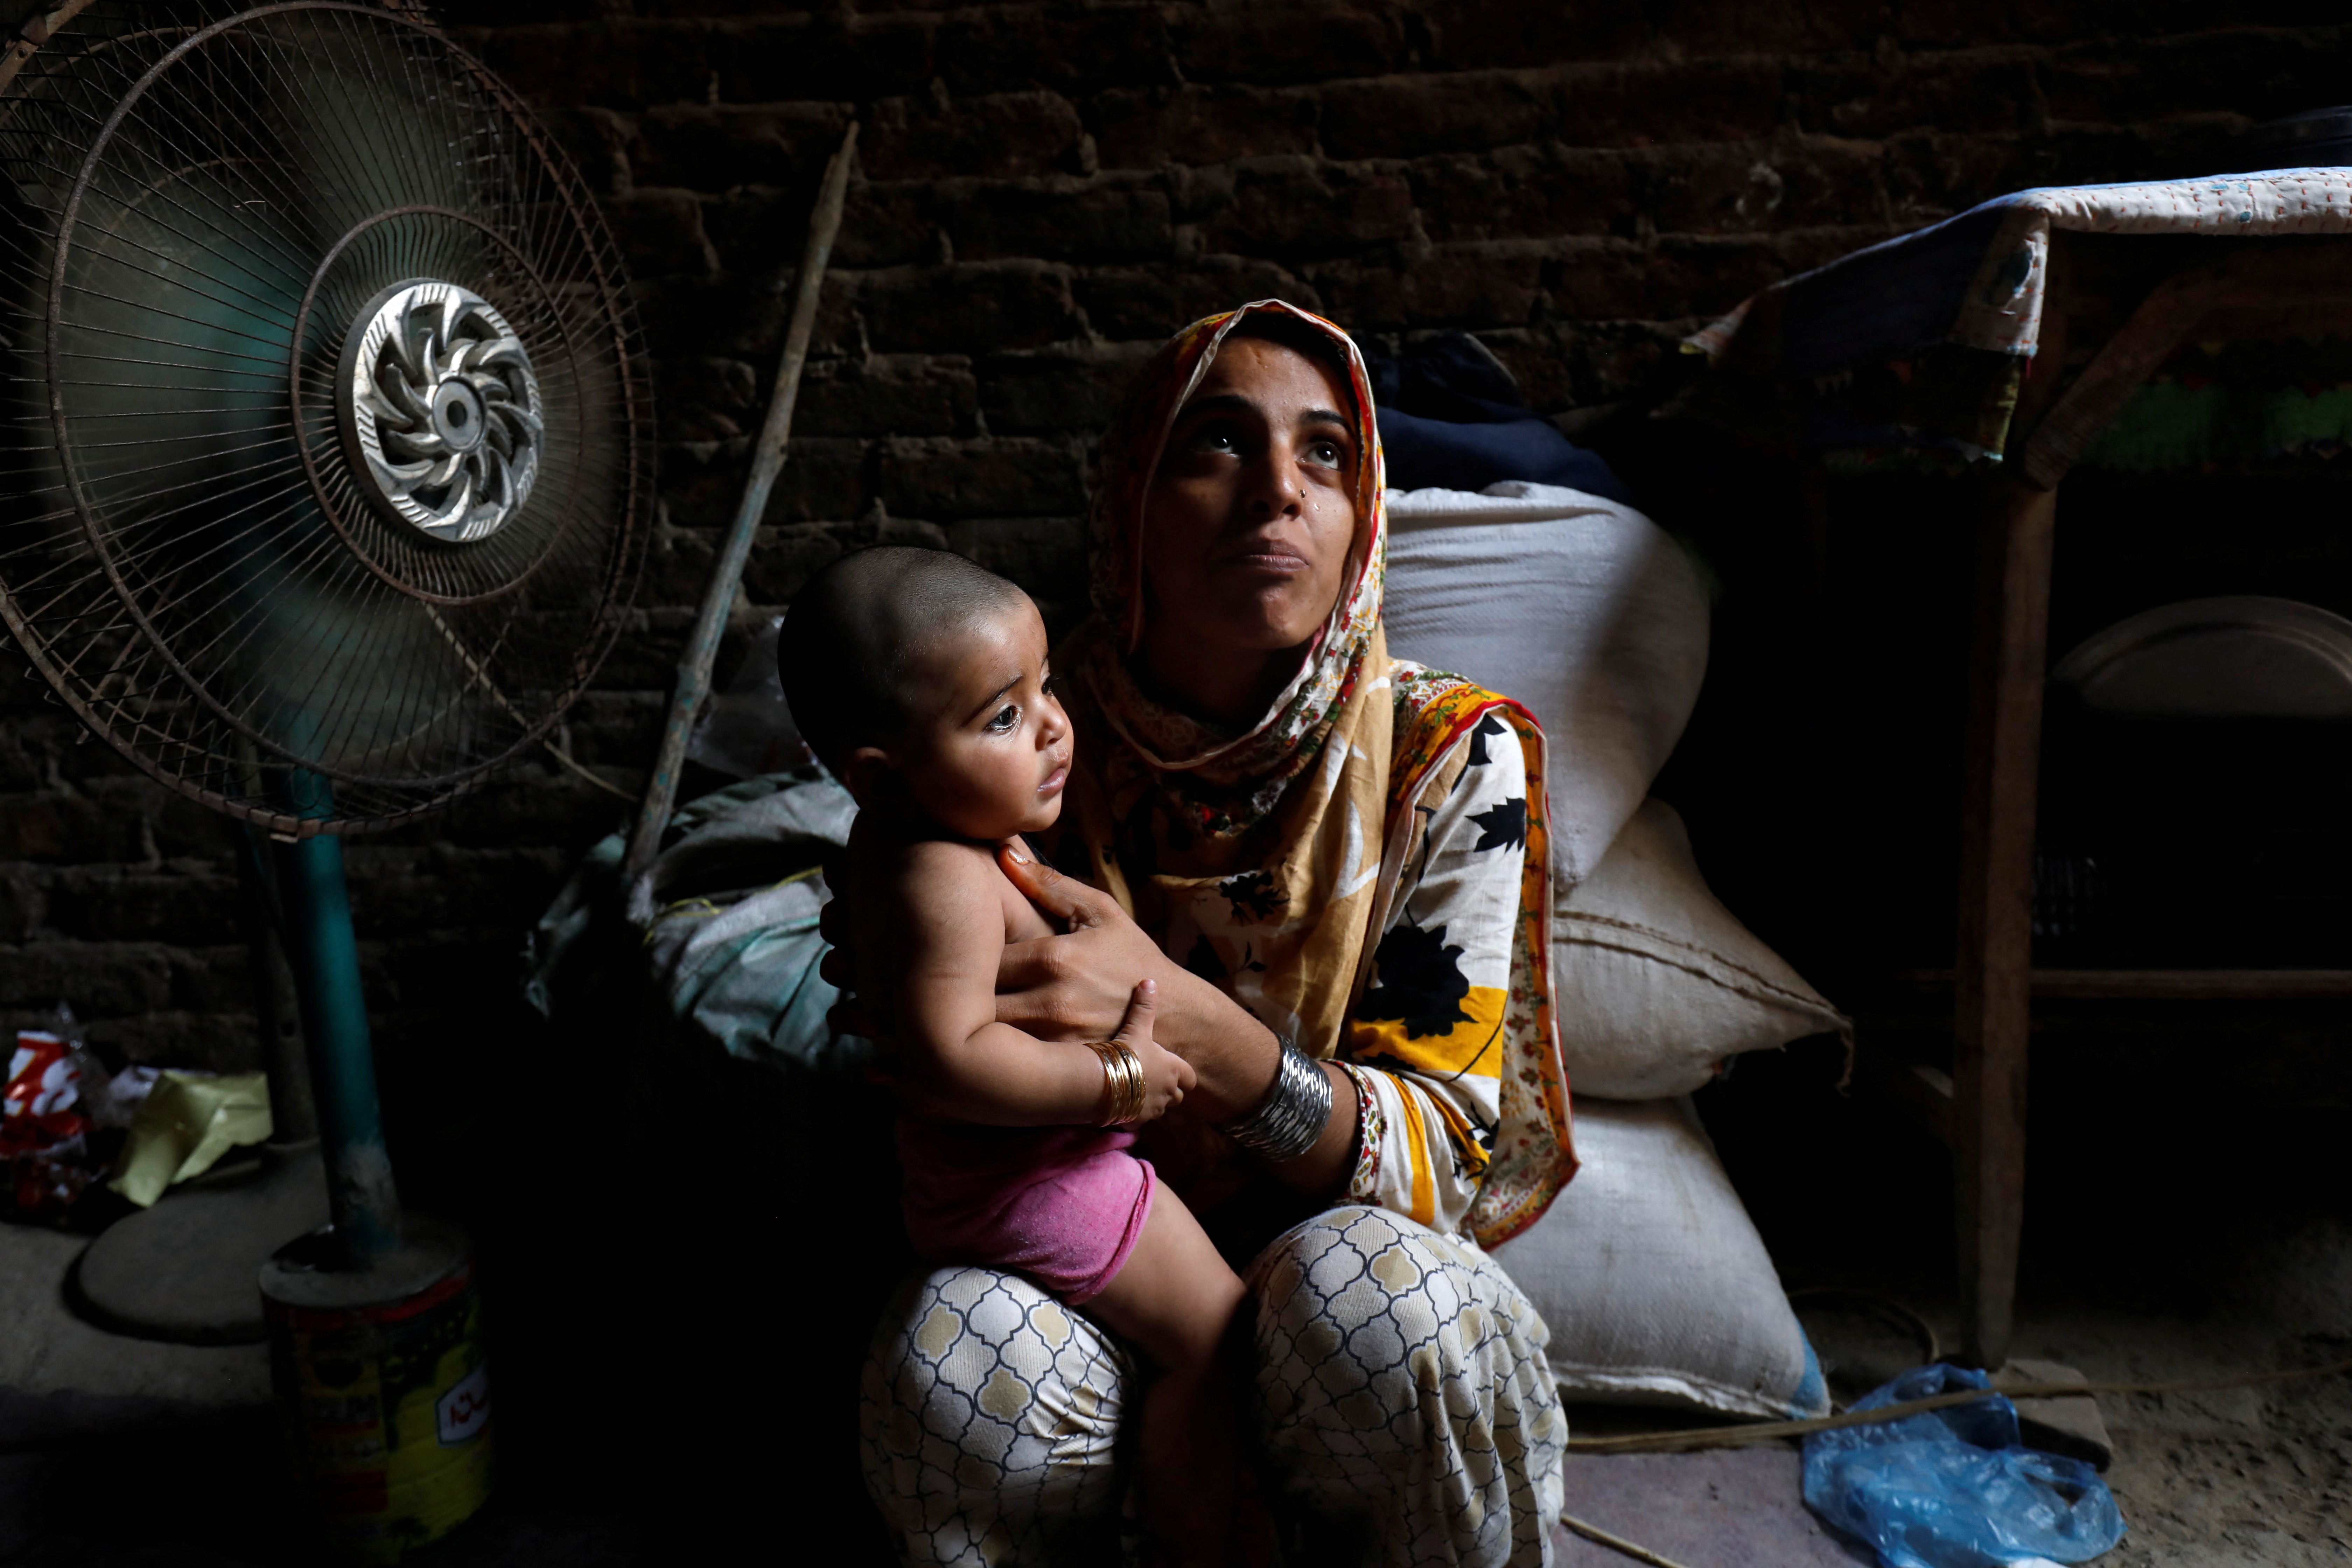 Razia, 25, and her six-month-old daughter Tamanna cool off during a heatwave in Jacobabad, Pakistan